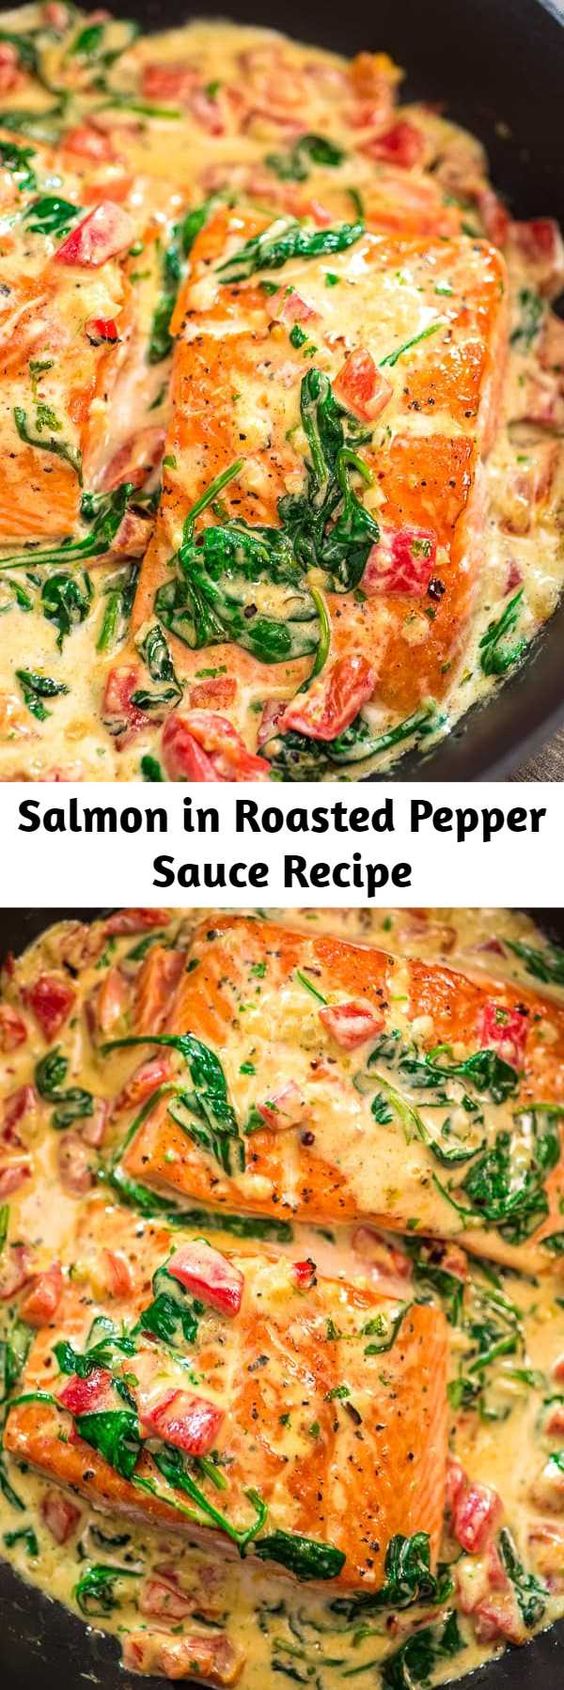 Salmon in Roasted Pepper Sauce Recipe - This Salmon in Roasted Pepper Sauce makes an absolutely scrumptious meal, worthy of a special occasion. Make this easy one-pan dinner in just 20 minutes! #salmon #dinner #fish #seafood #keto